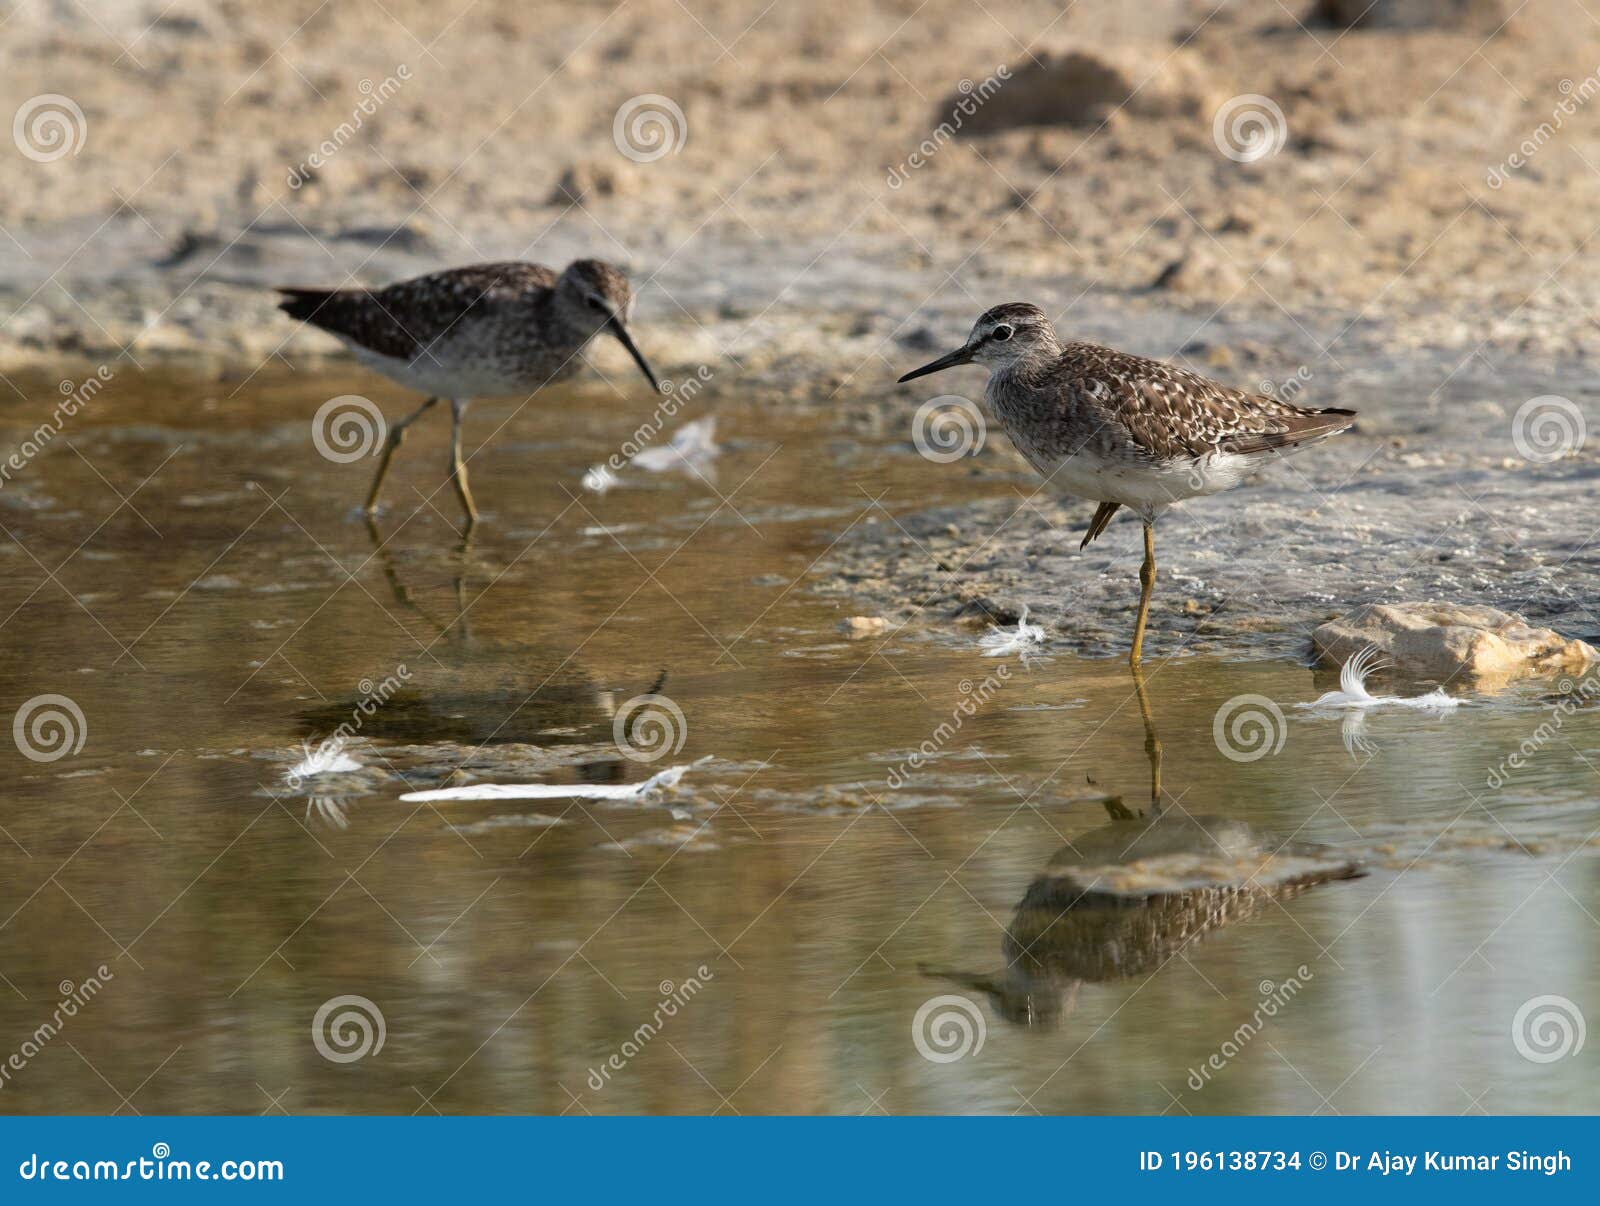 a pair of wood sandpipers at asker marsh, bahrain